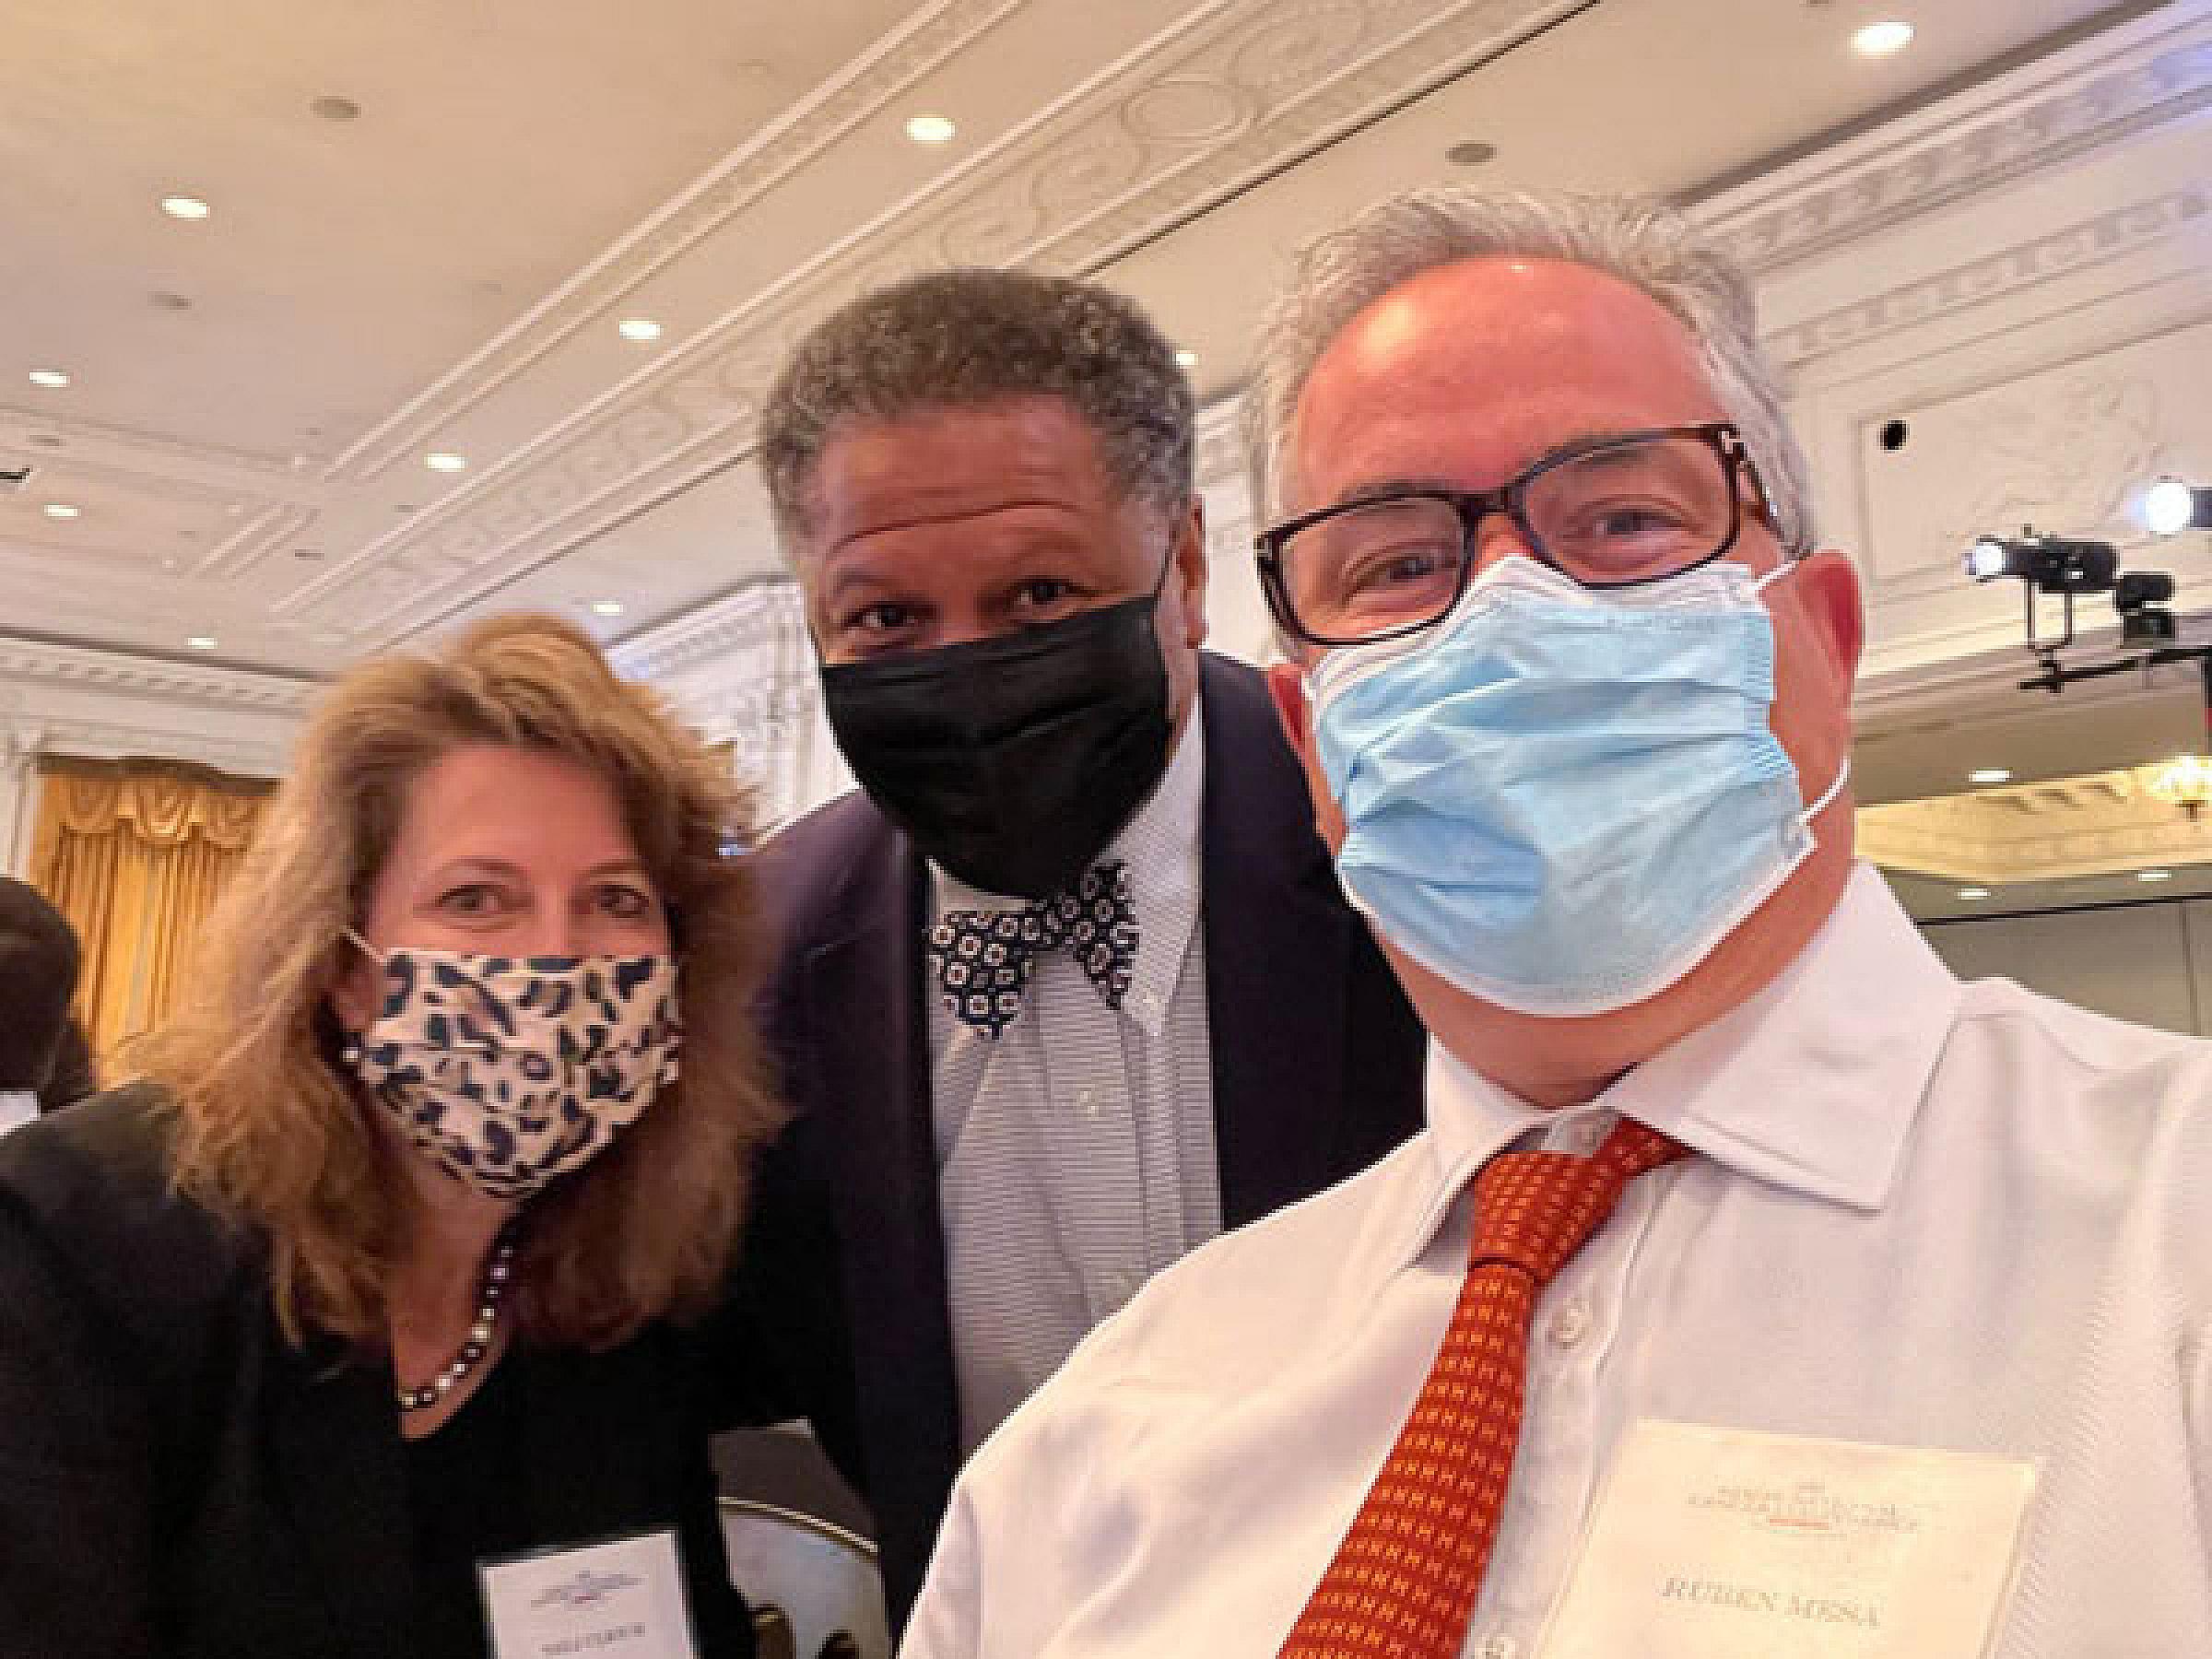 Neli Ulrich, PhD, MS, with Robert A. Winn, MD, director of the VCU Massey Cancer Center, and Ruben Mesa, MD, director of UT Health San Antonio MD Anderson Cancer Center